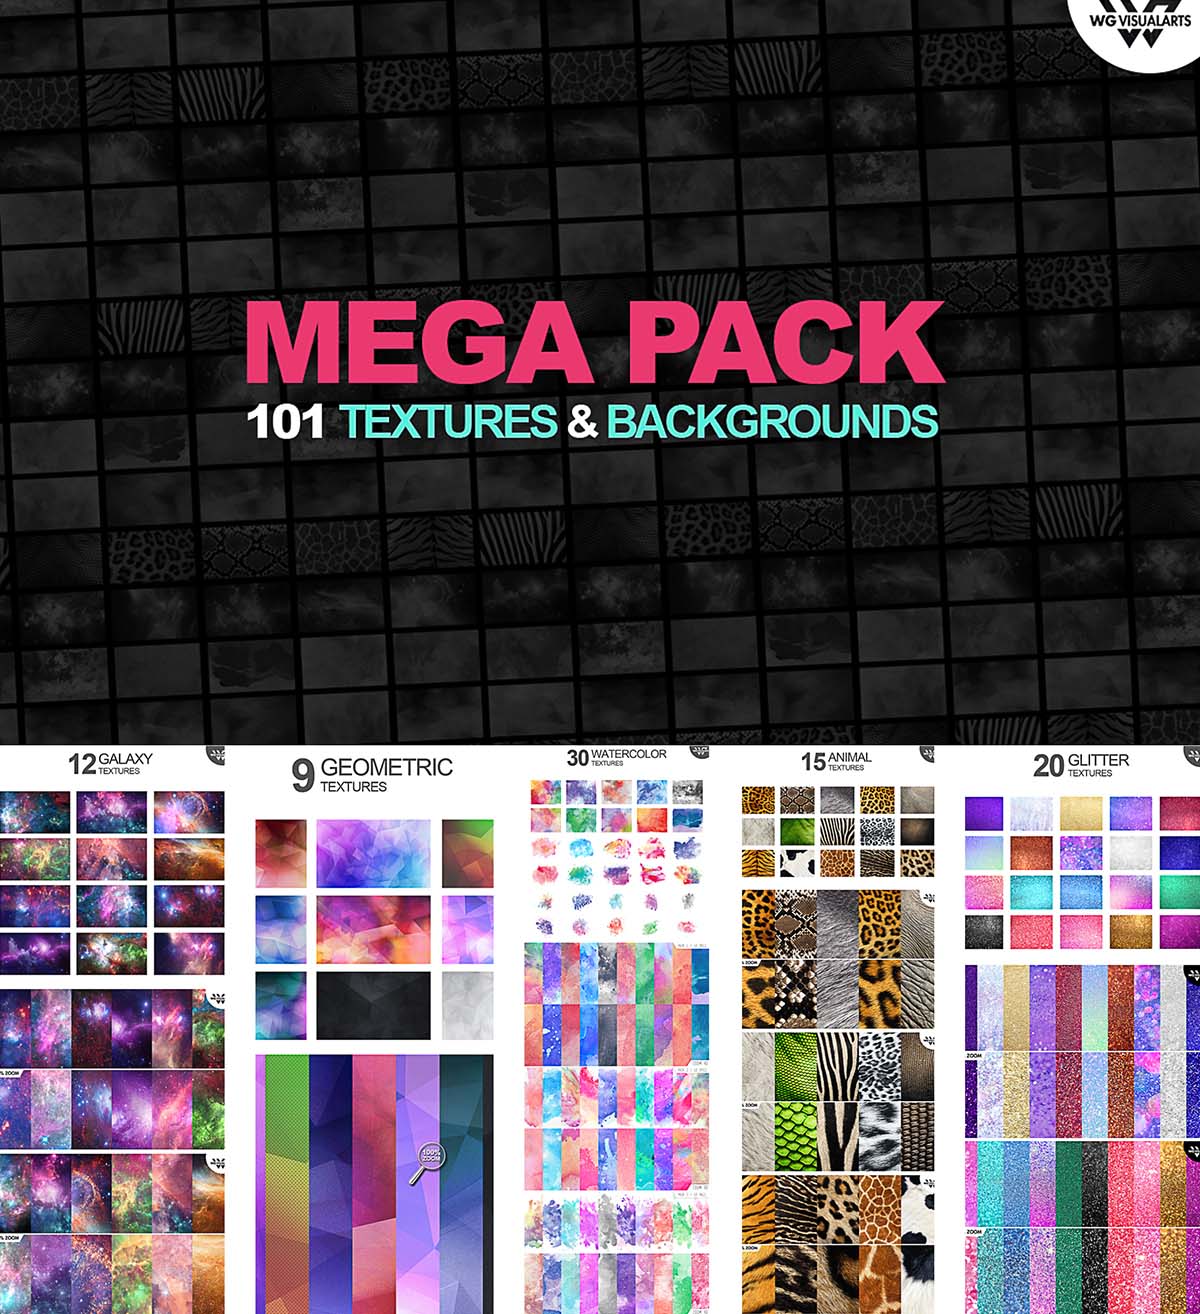 Mega pack of textures and backgrounds